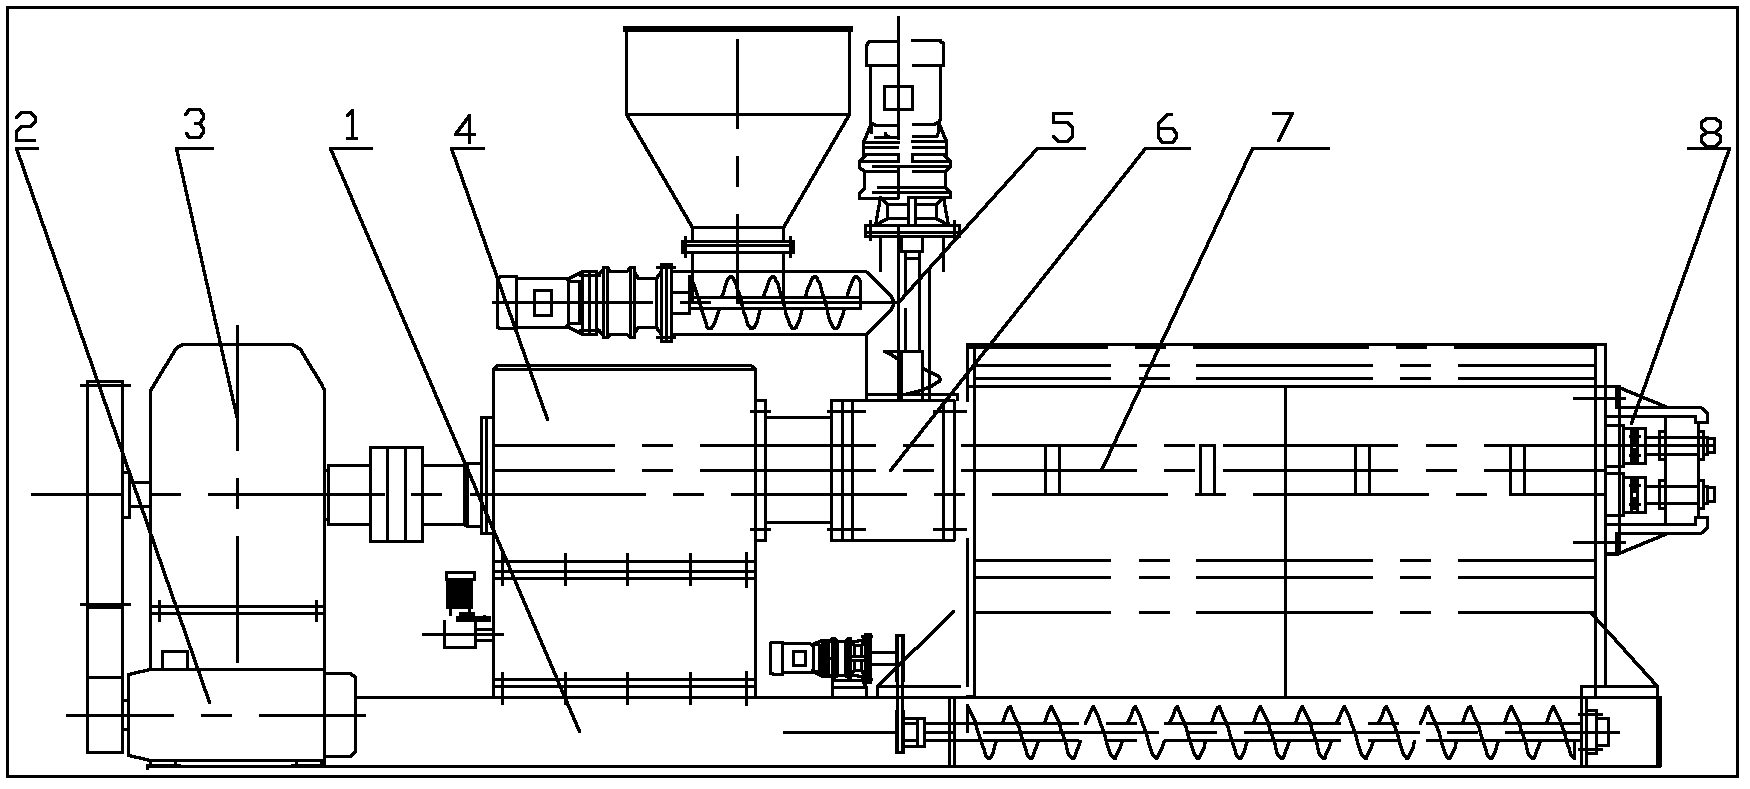 Double worm oil press capable of preventing oil materials from sliding out of chamber